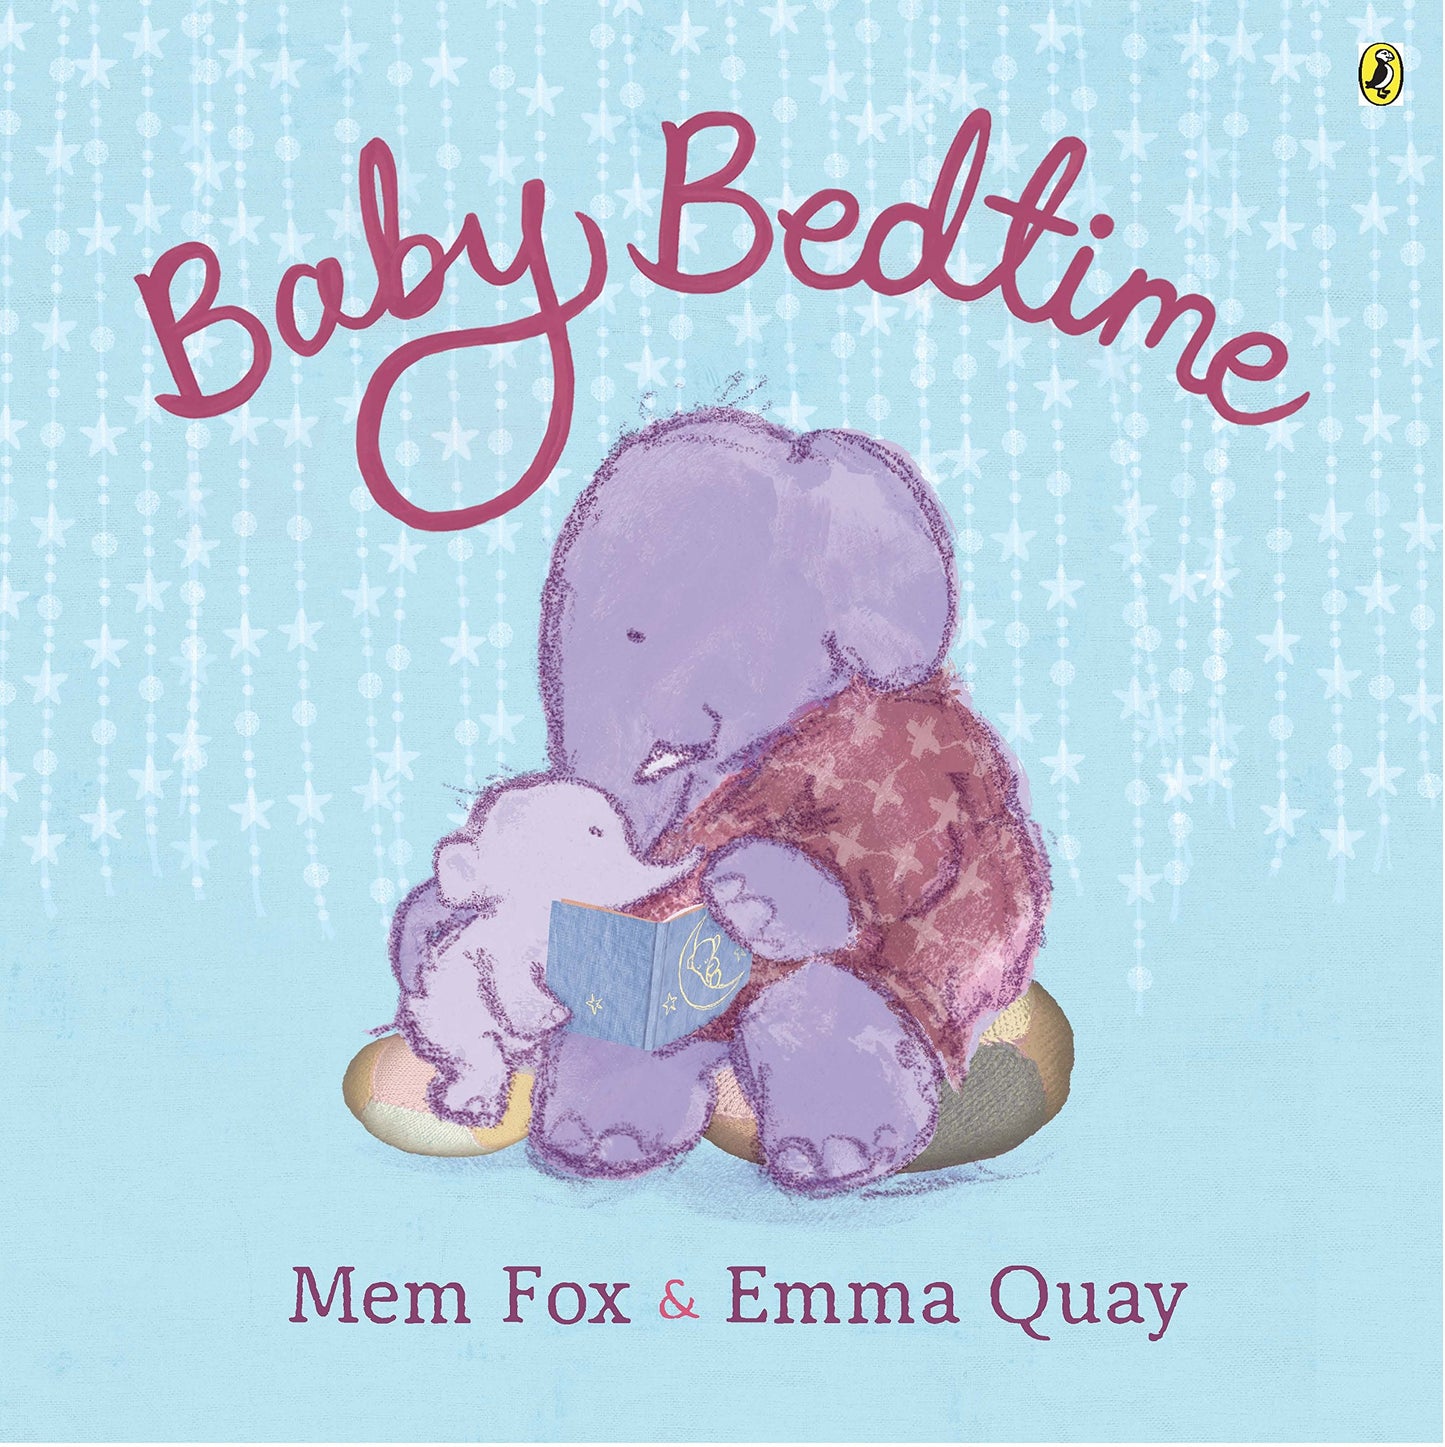 Children's book Baby Bedtime at Chapters online bookstore Pakistan